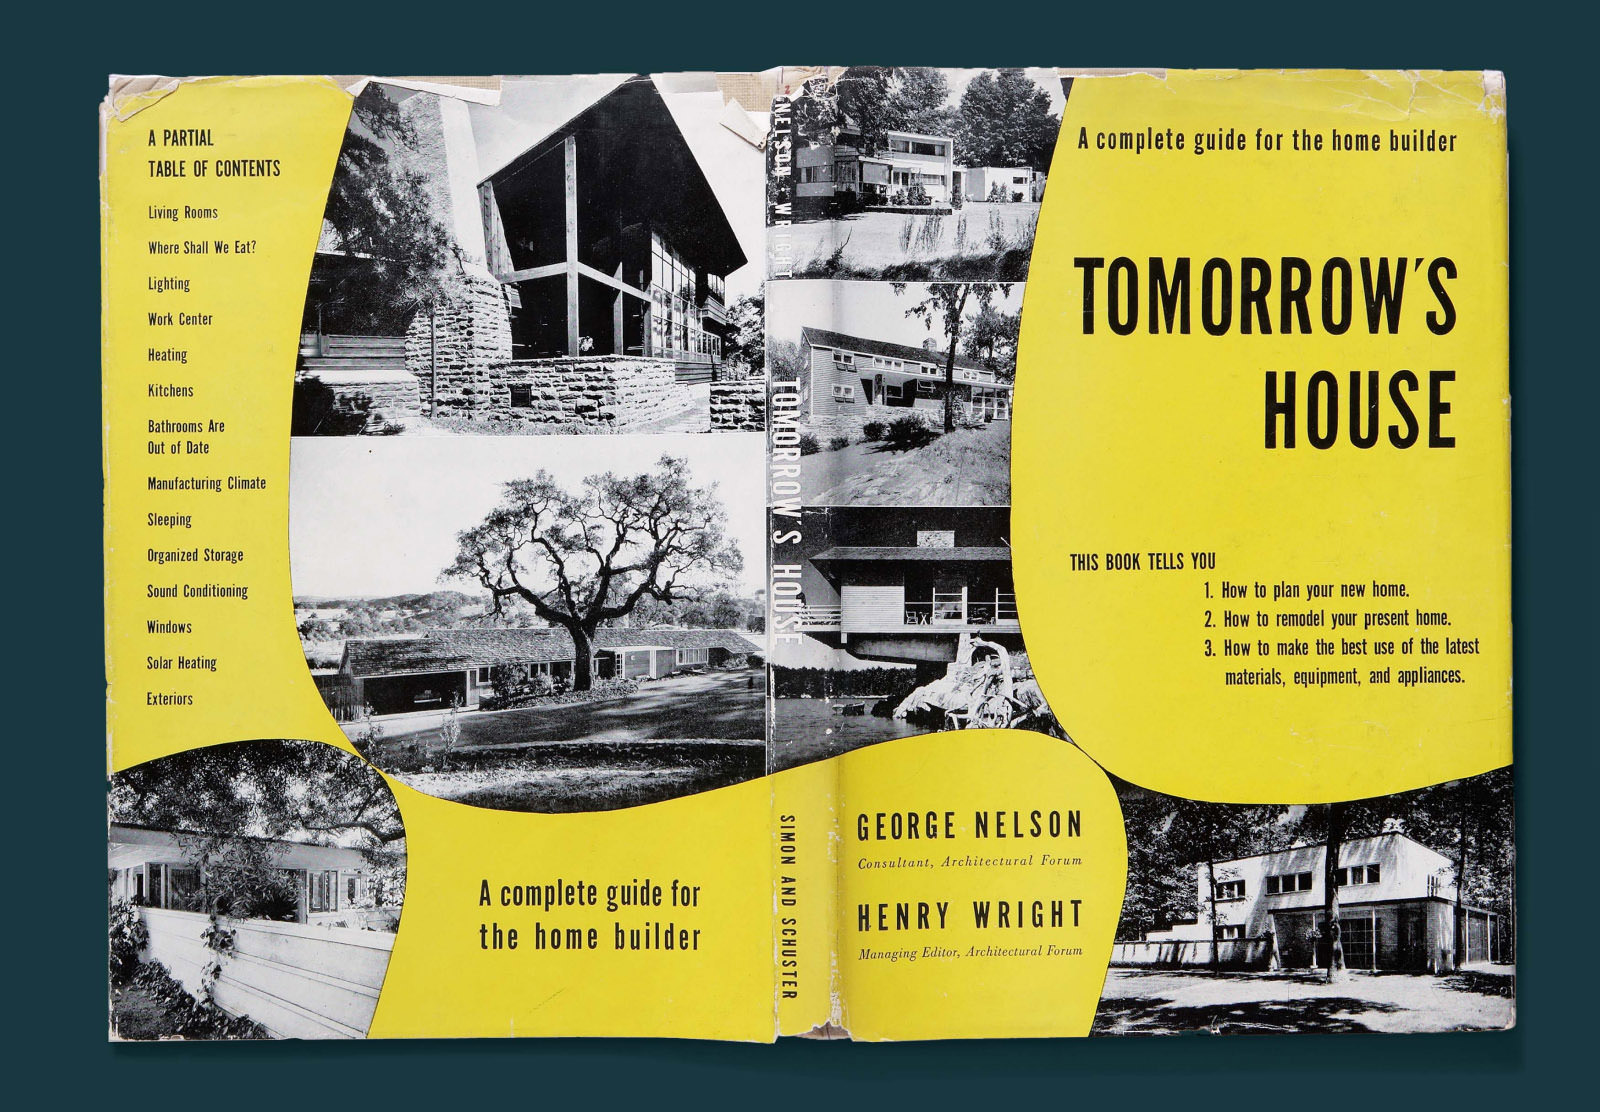 Front and back book covers of Tomorrow's House with the title, author, and table on contents in black text positioned within irregular, yellow background featuring black and white photographs of modernist houses.